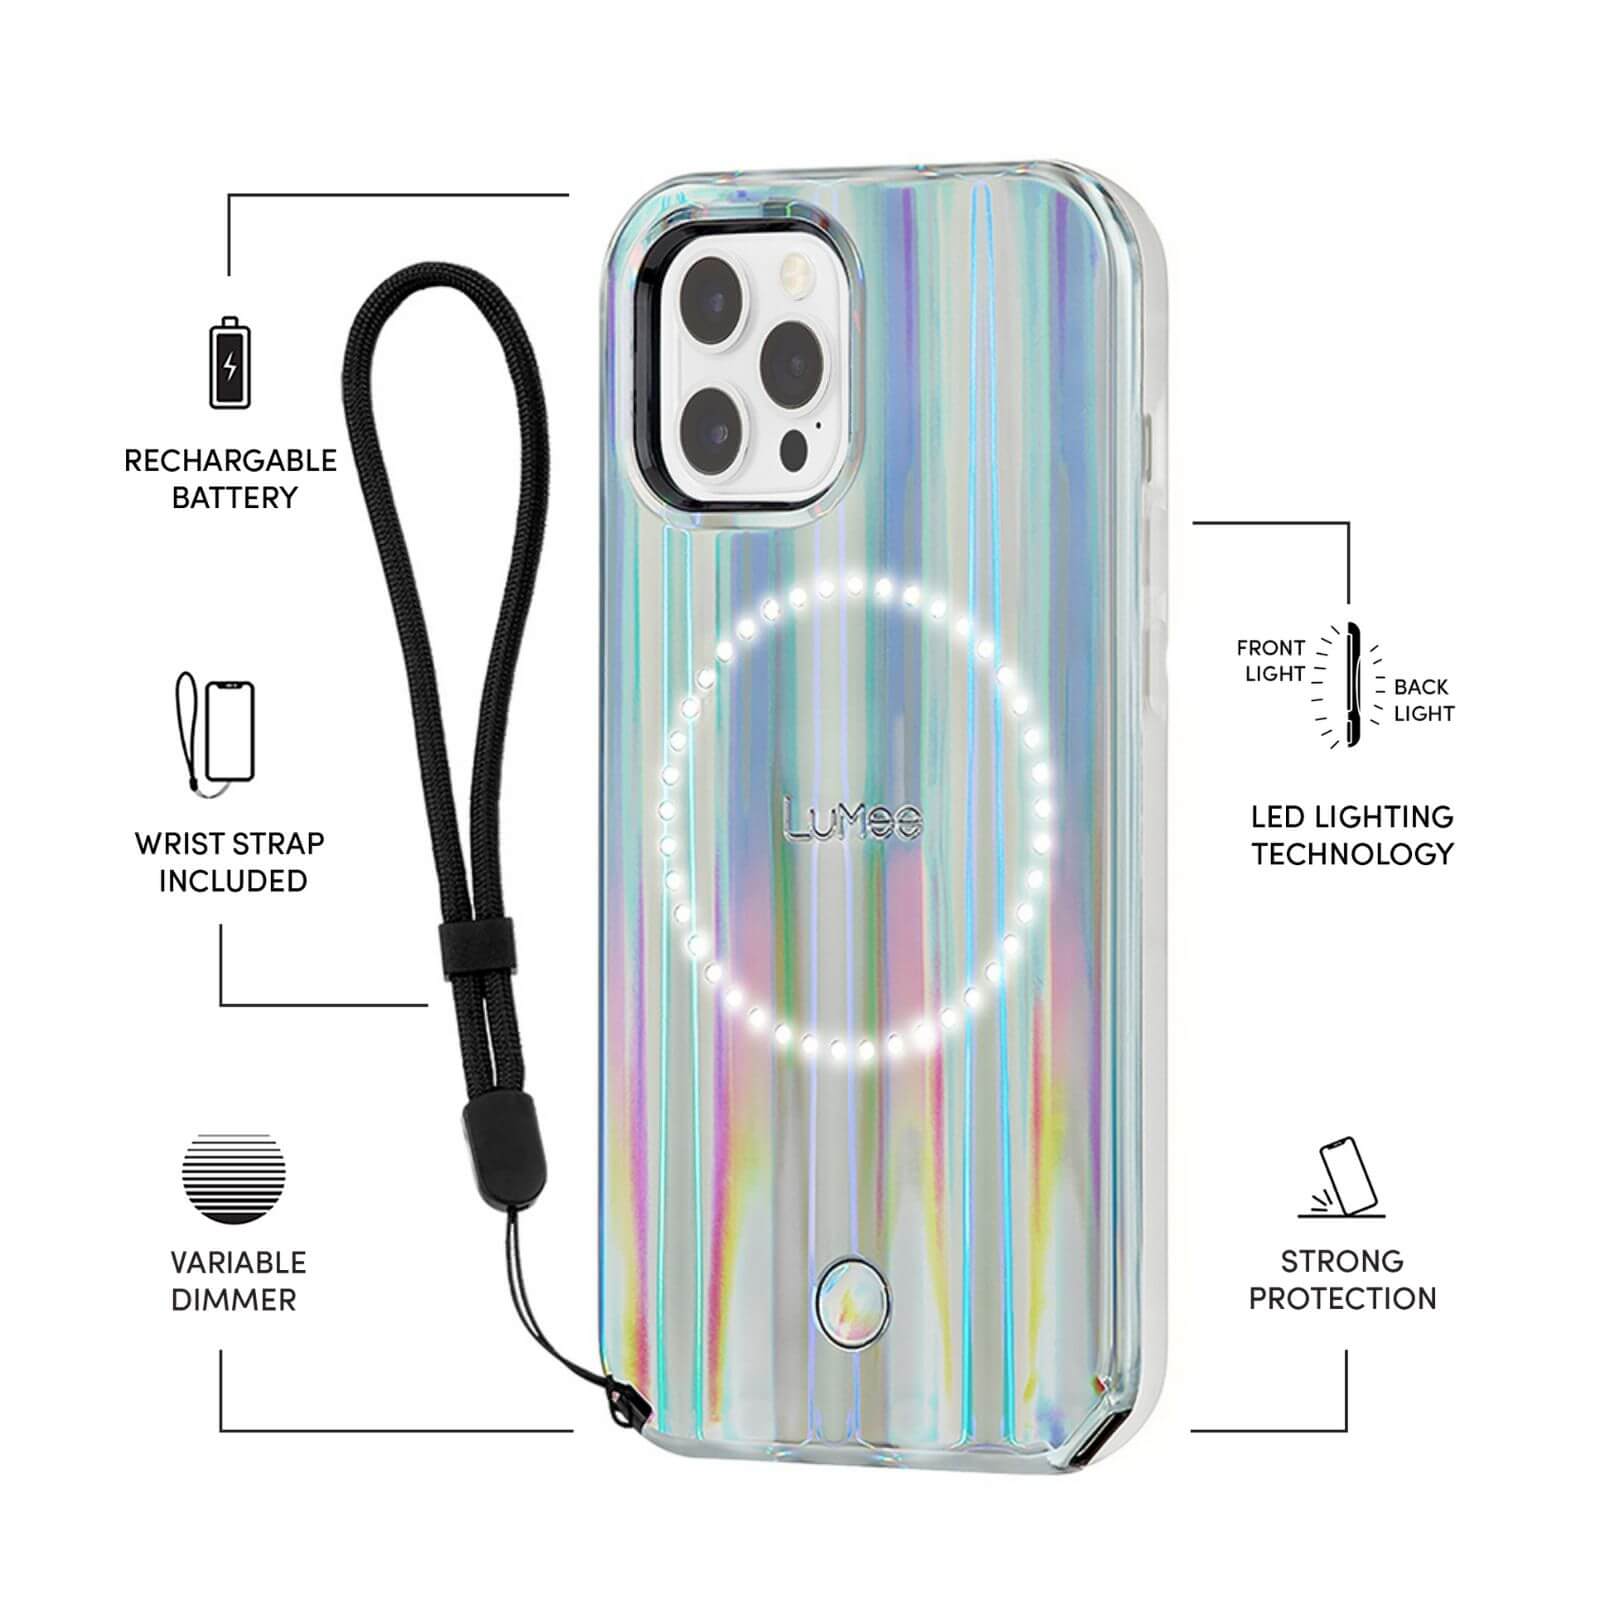 Features Rechargeable Batter, Wrist Strap Included, Variable Dimmer, Front light and back light LED lighting technology, strong protection. color::Holographic